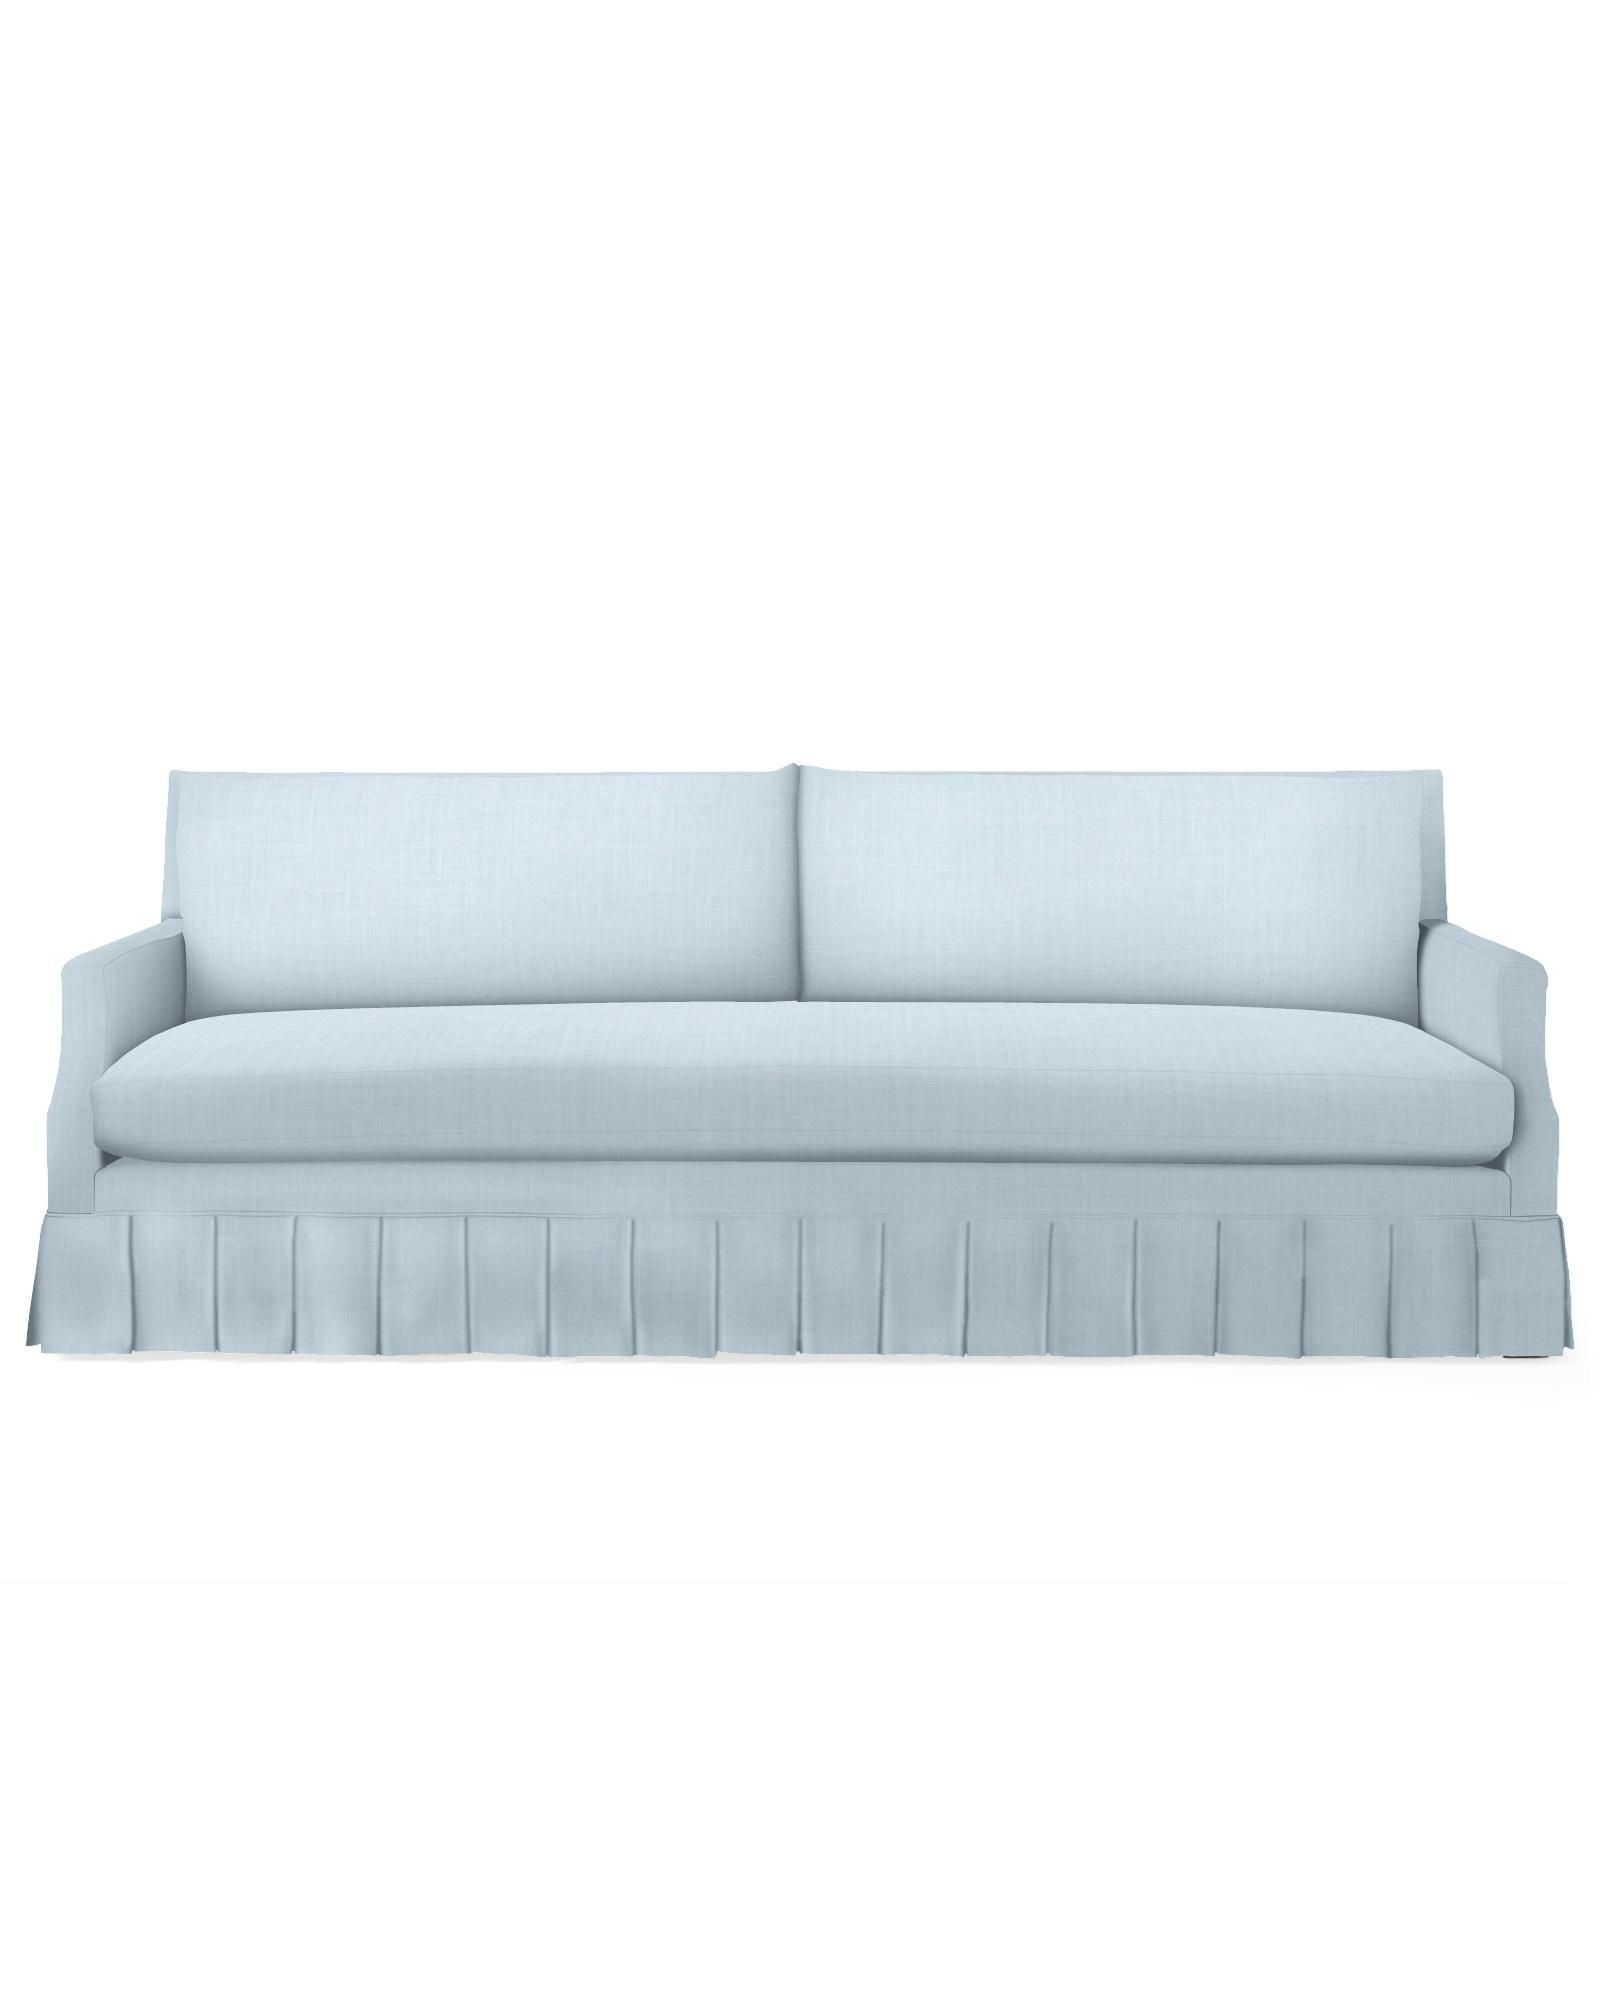 Grady Pleated Sofa - Sky Washed Linen | Serena and Lily